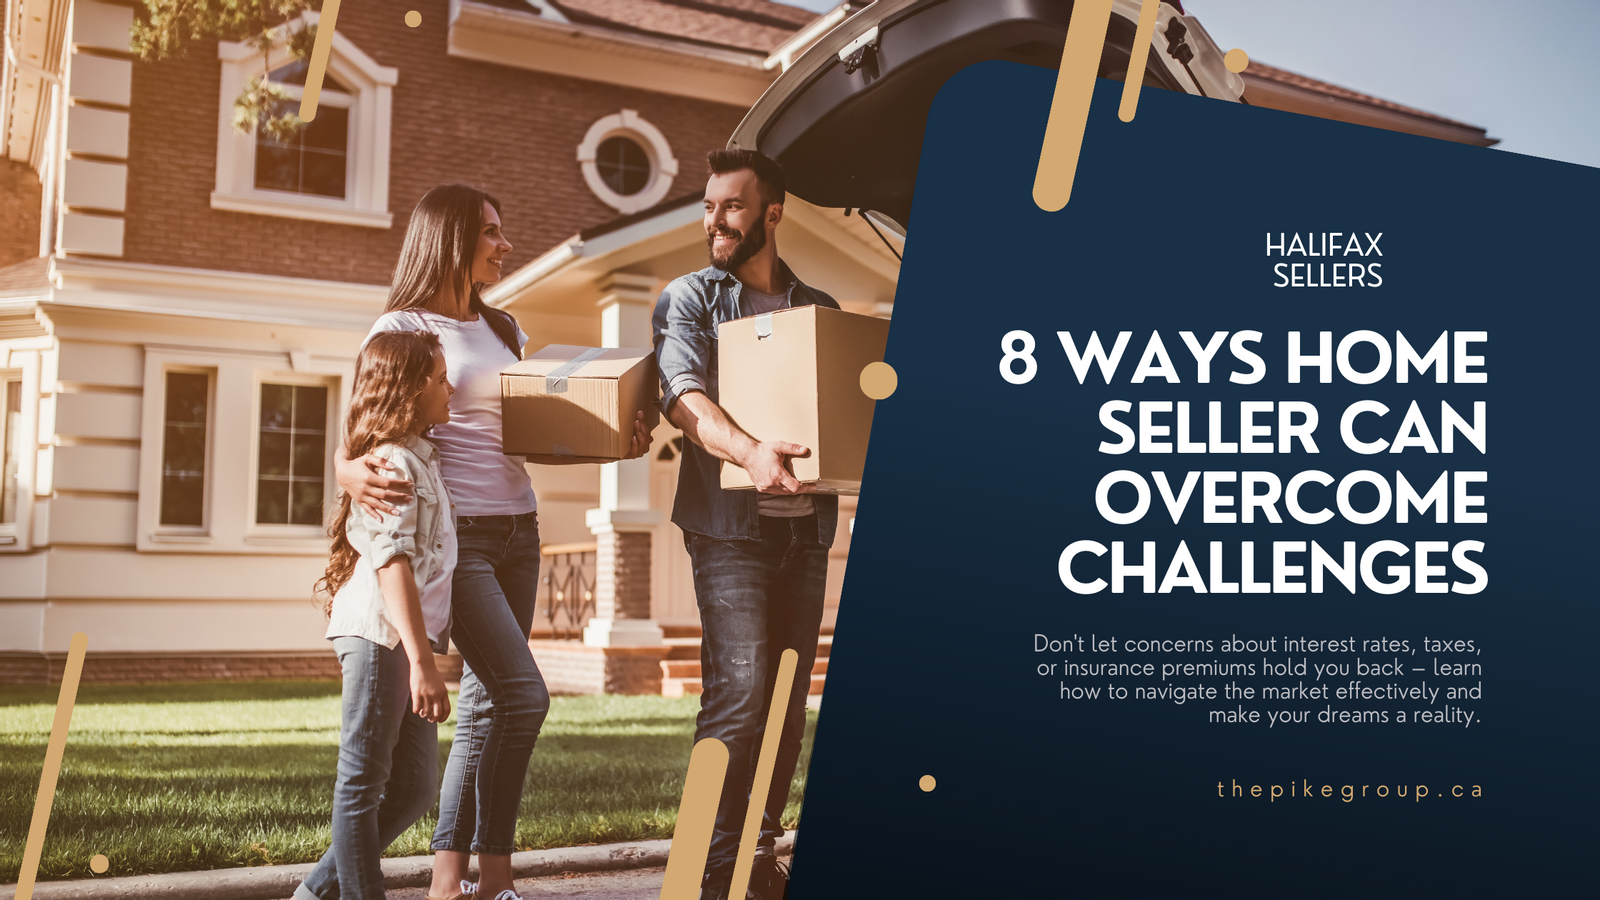 8 Ways Home Sellers Can Overcome Challenges in Halifax